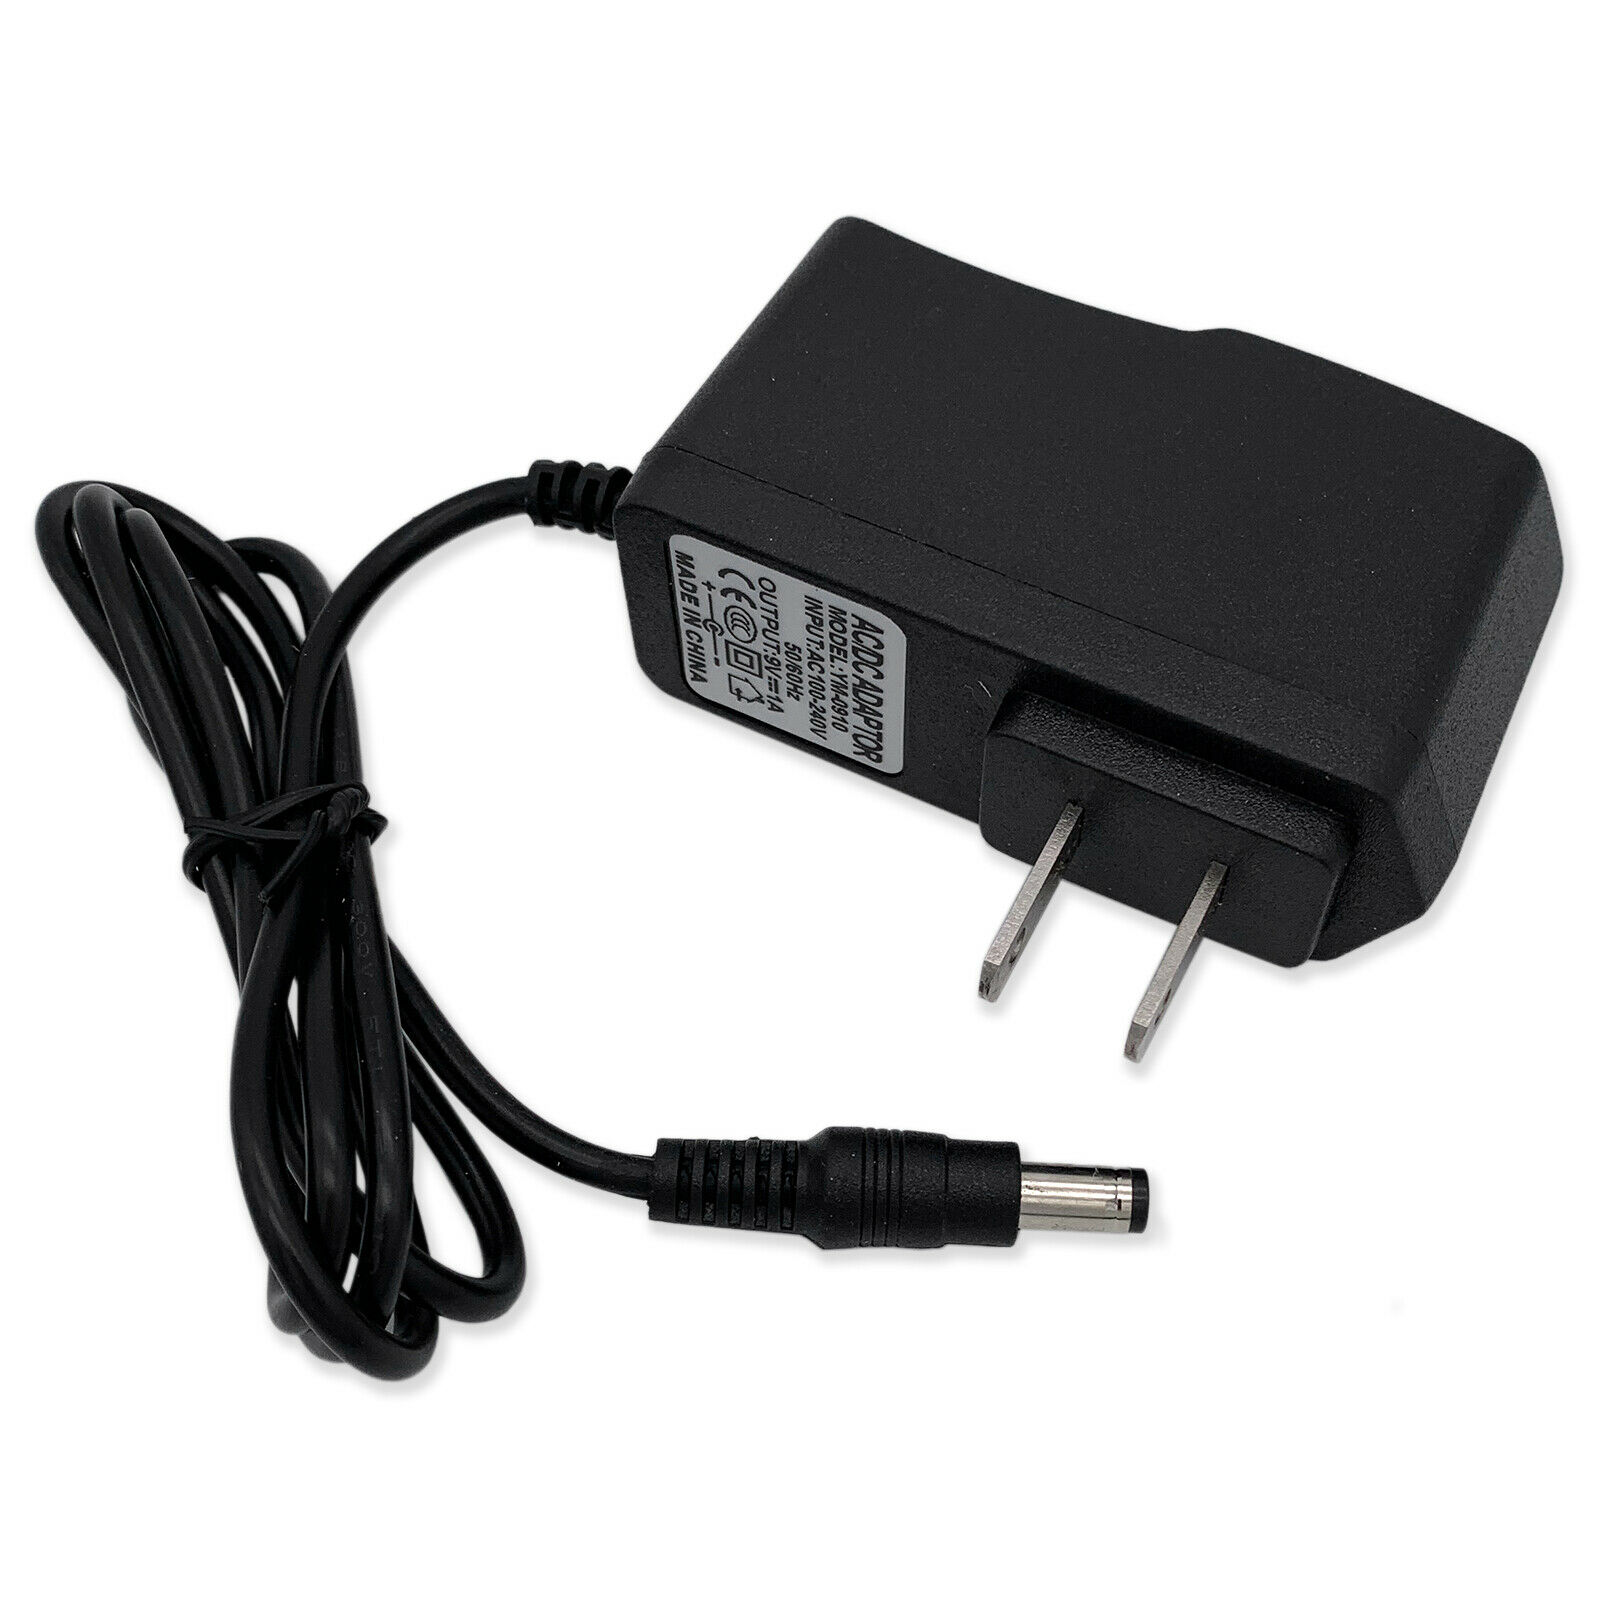 9V AC/DC Adapter Charger For Brother AD-24 AD-24ES LABEL PRINTER Power Supply Brand: Unbranded/Generic Color: Black